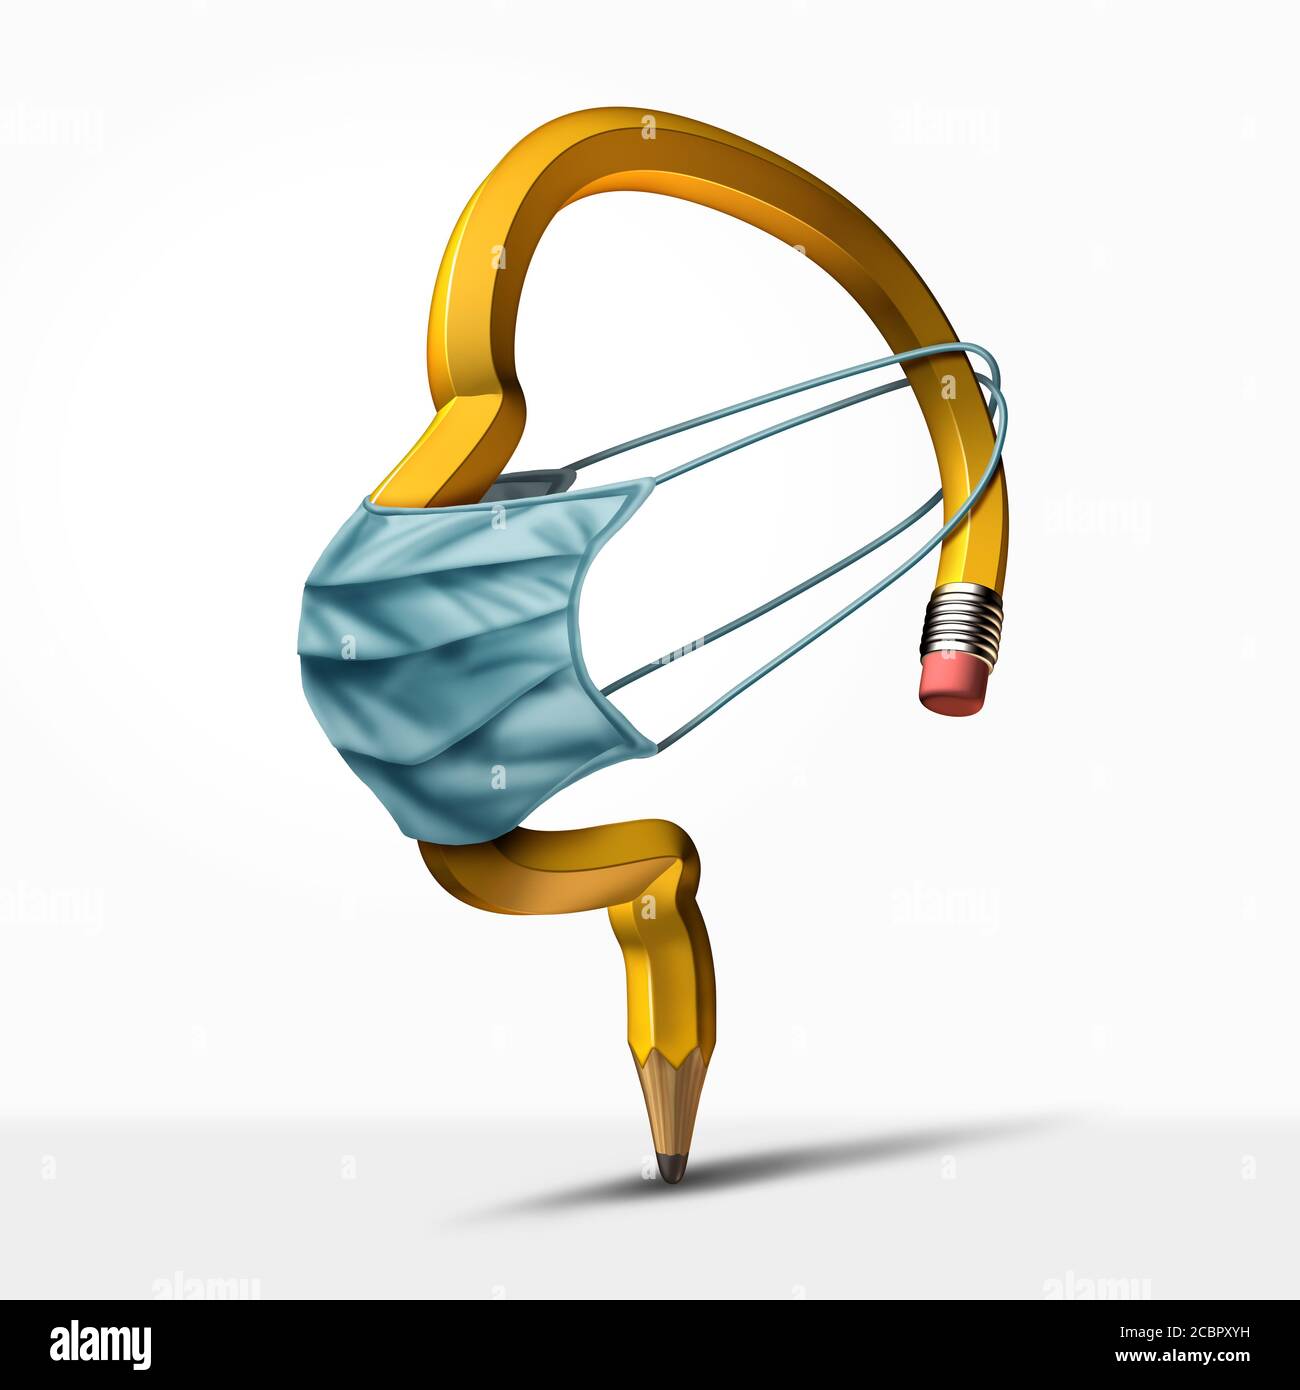 School health safety and student medical symbol as an education symbol and coronavirus or covid-19 lockdown with 3D illustration elements. Stock Photo